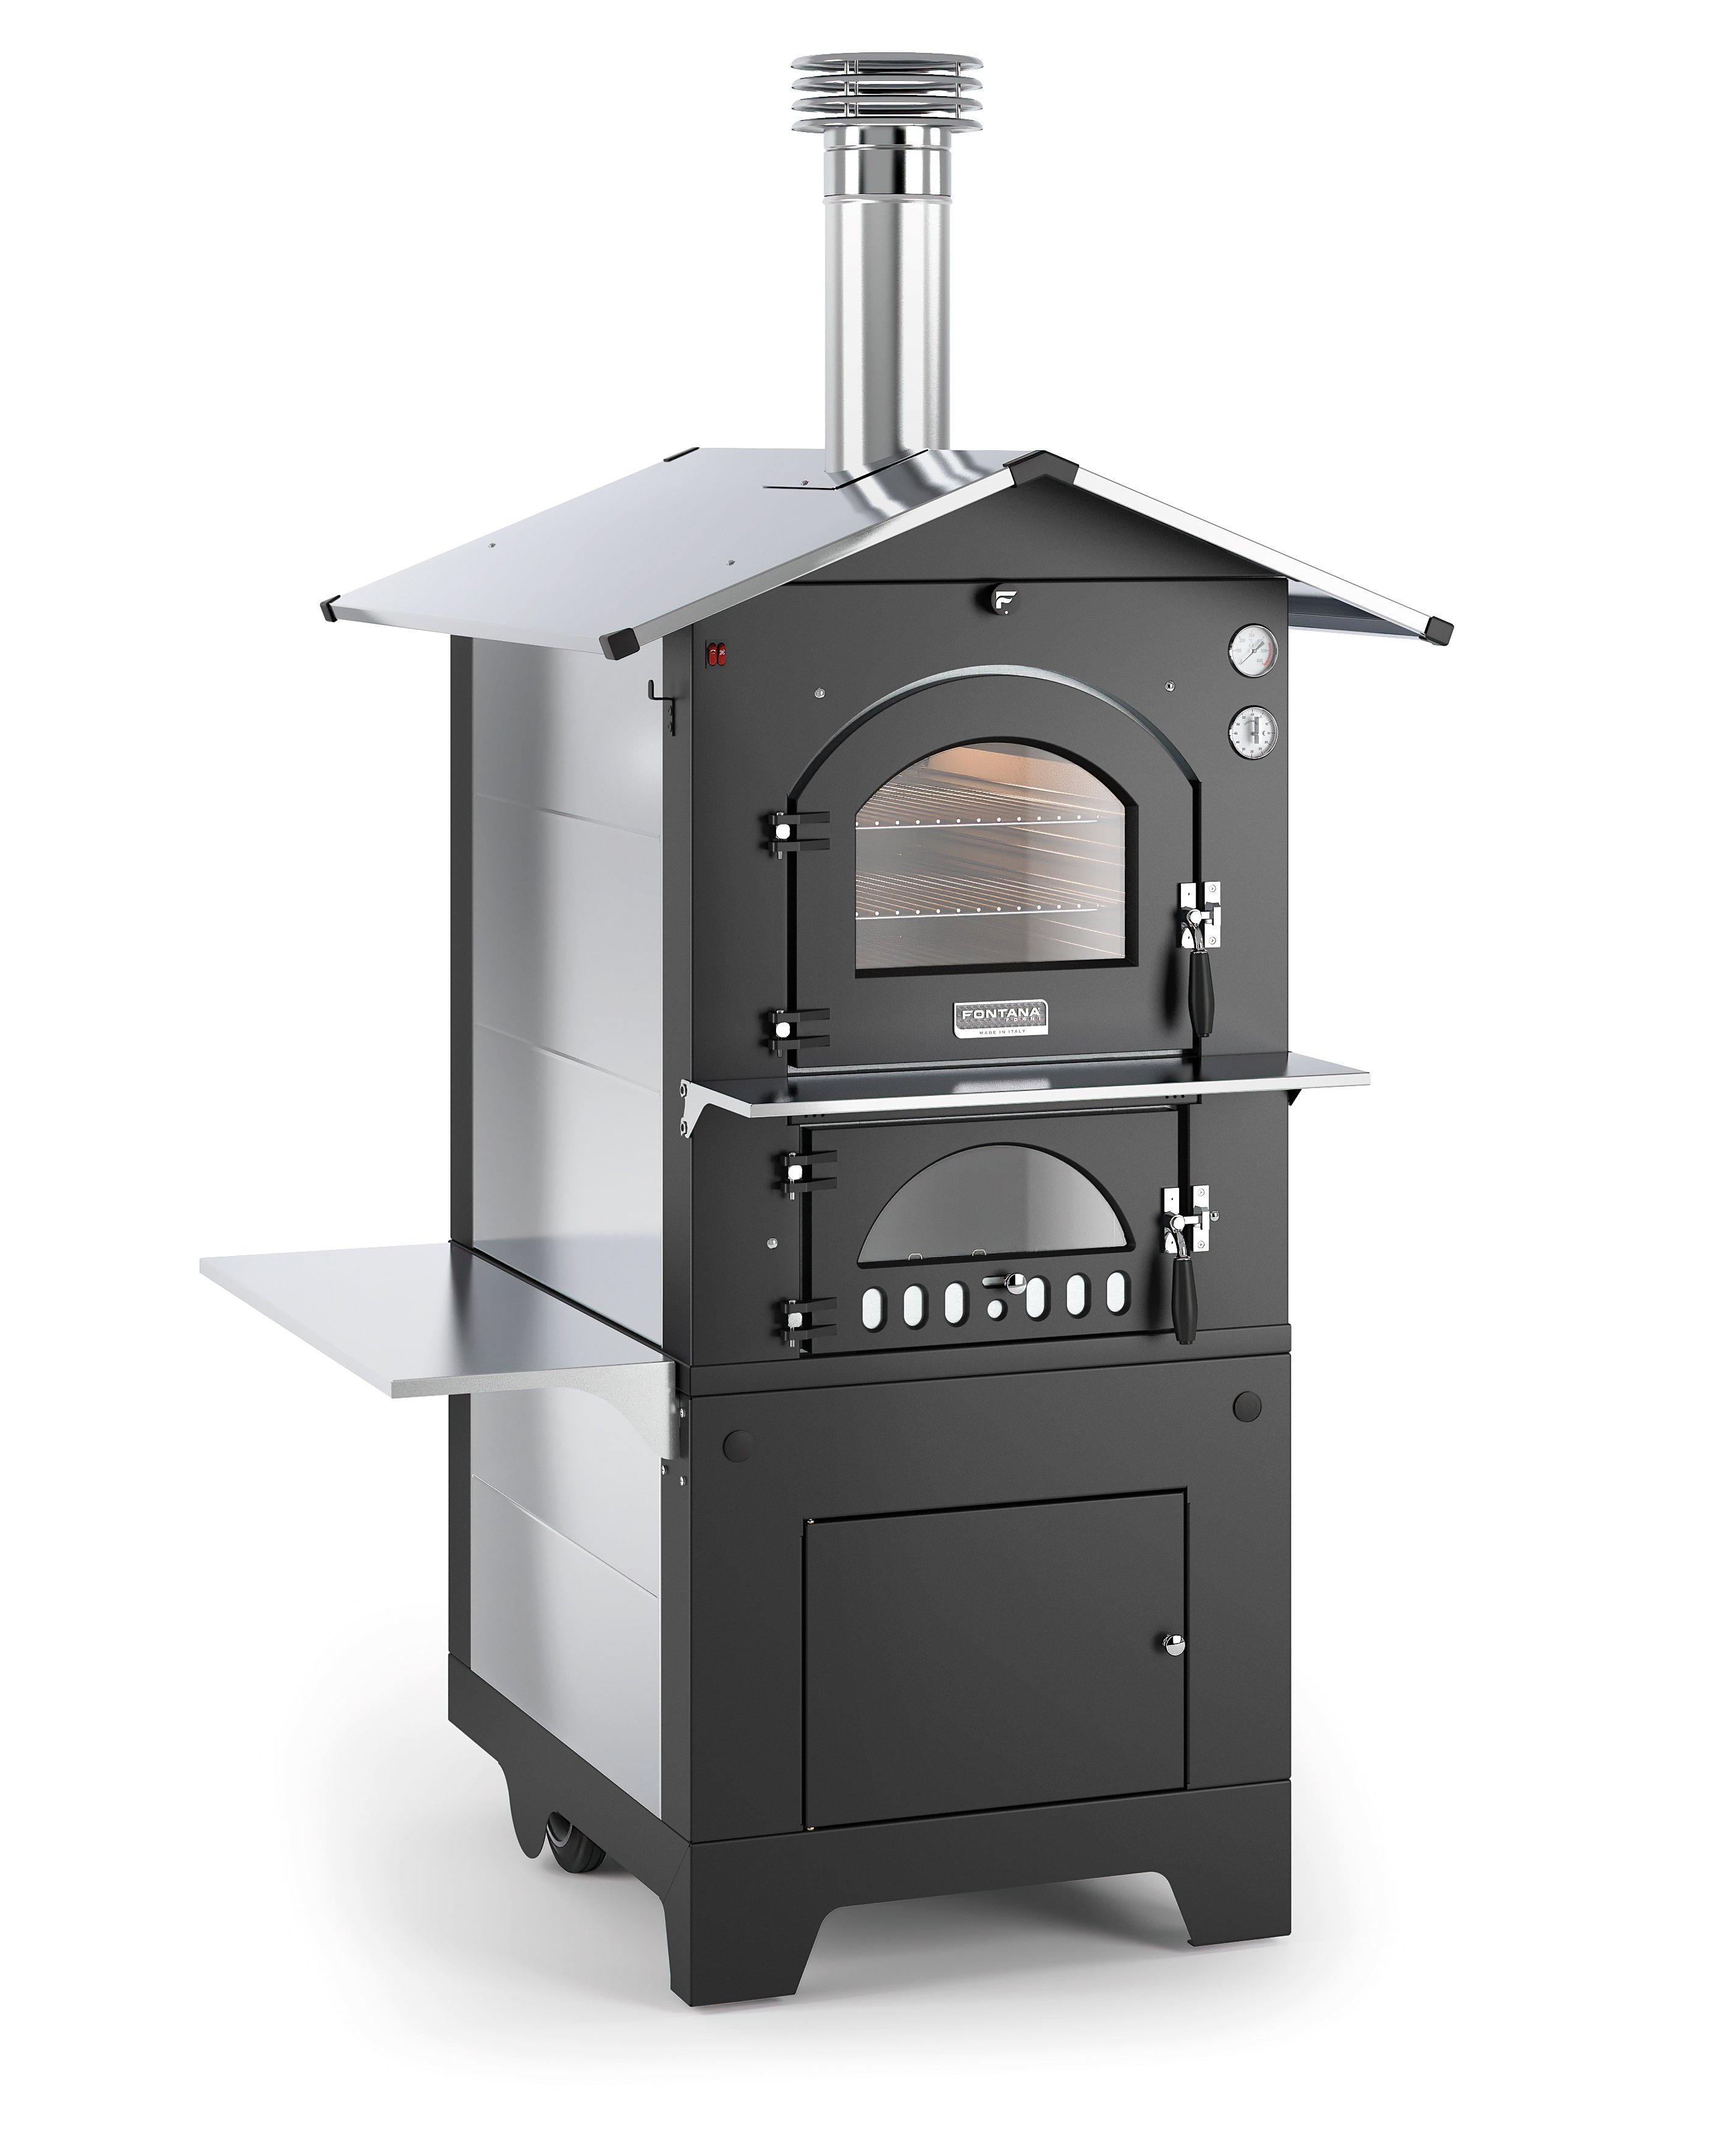 Bakehouse Fontana Gusto made of weatherproof stainless steel, indirect wood firing, three baking levels 100x65cm